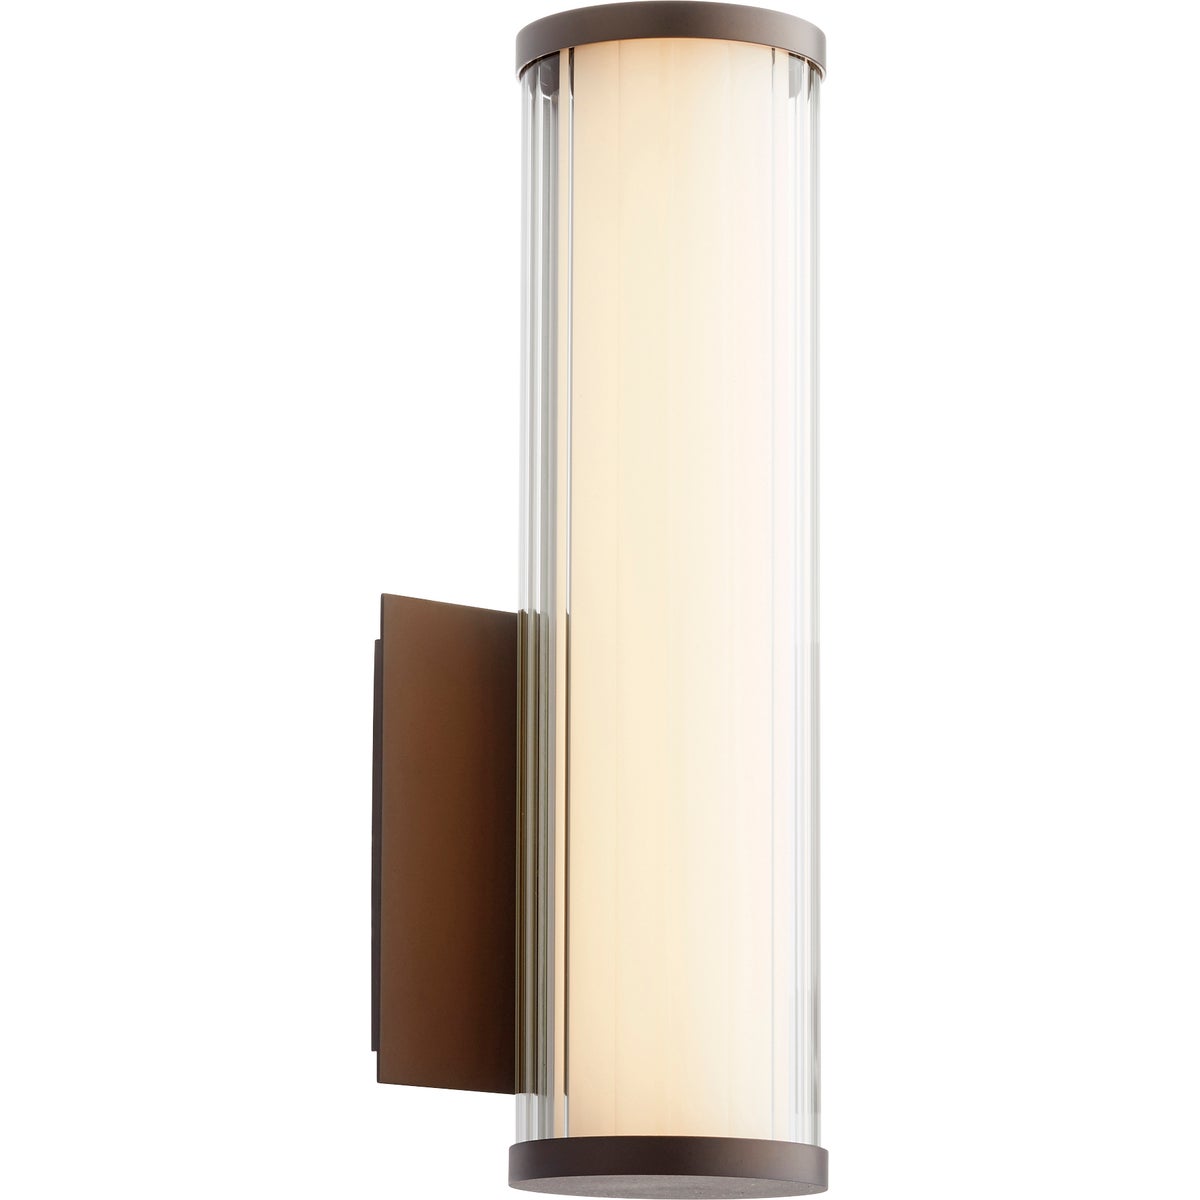 LED Wall Sconce with glass tube and clean lines, perfect for modern applications. 9W, 689 lumens, 3000K color temperature. Damp location rated.